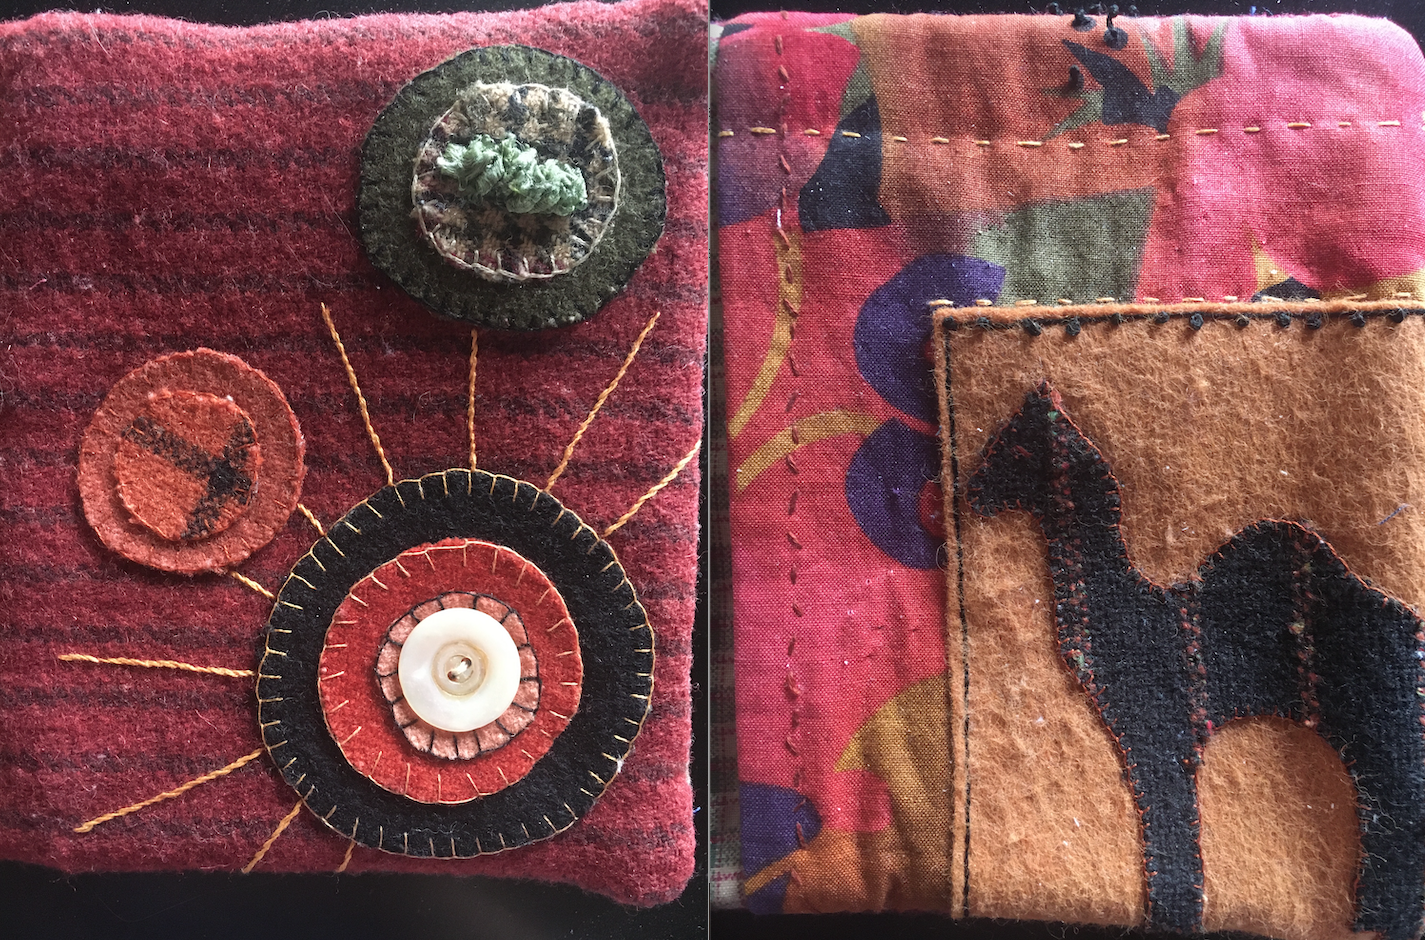 The front of wool appliqued books using wool fibers. There are buttons  and animals shapesmade of wool. The booklets hold sewing materials, paper, and other small items. 